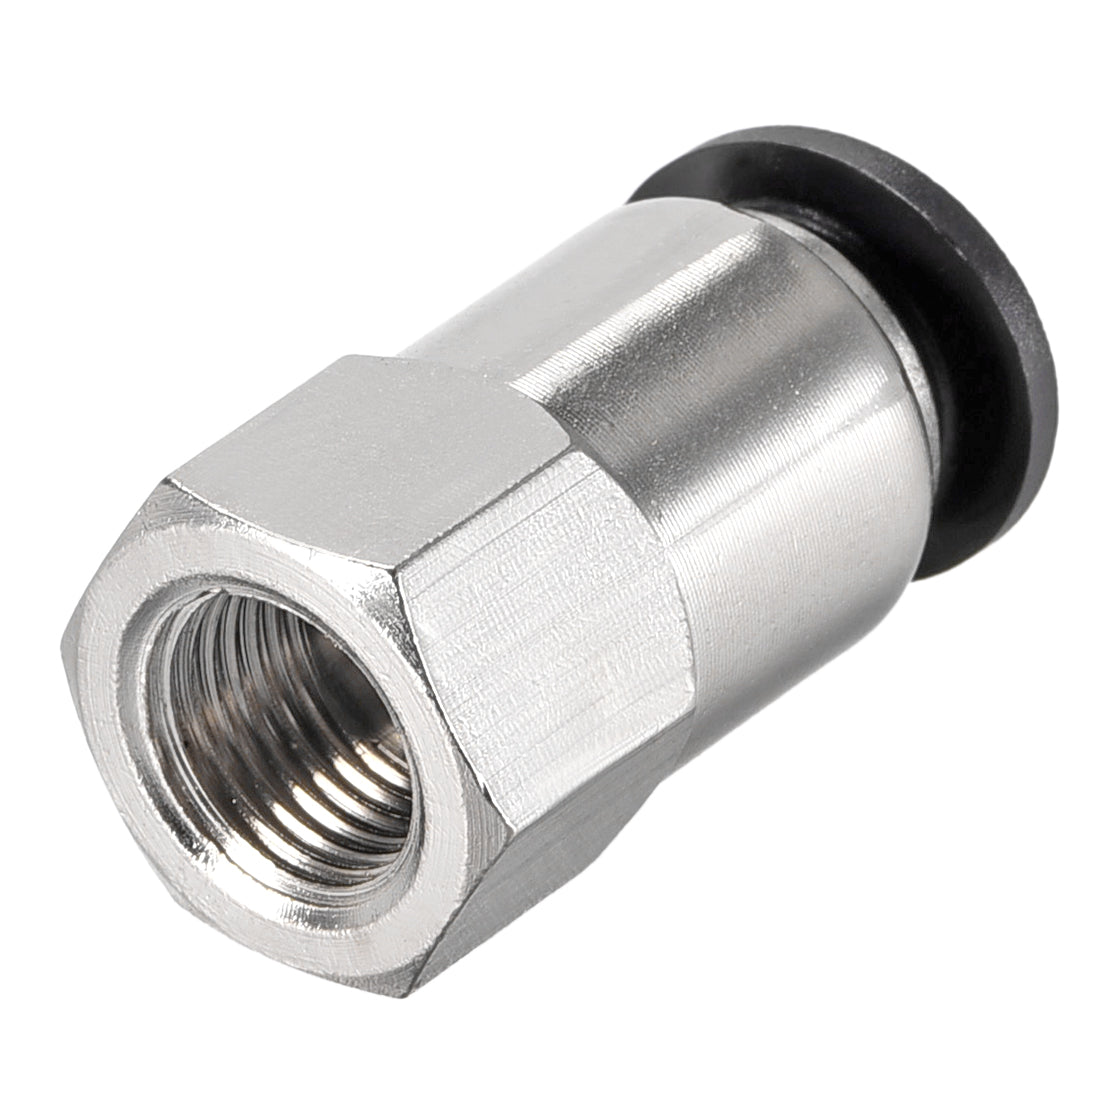 uxcell Uxcell Push to Connect Tube Fitting Adapter 8mm Tube OD x 1/8PT Female Straight Pneumatic Connecter Pipe Fitting